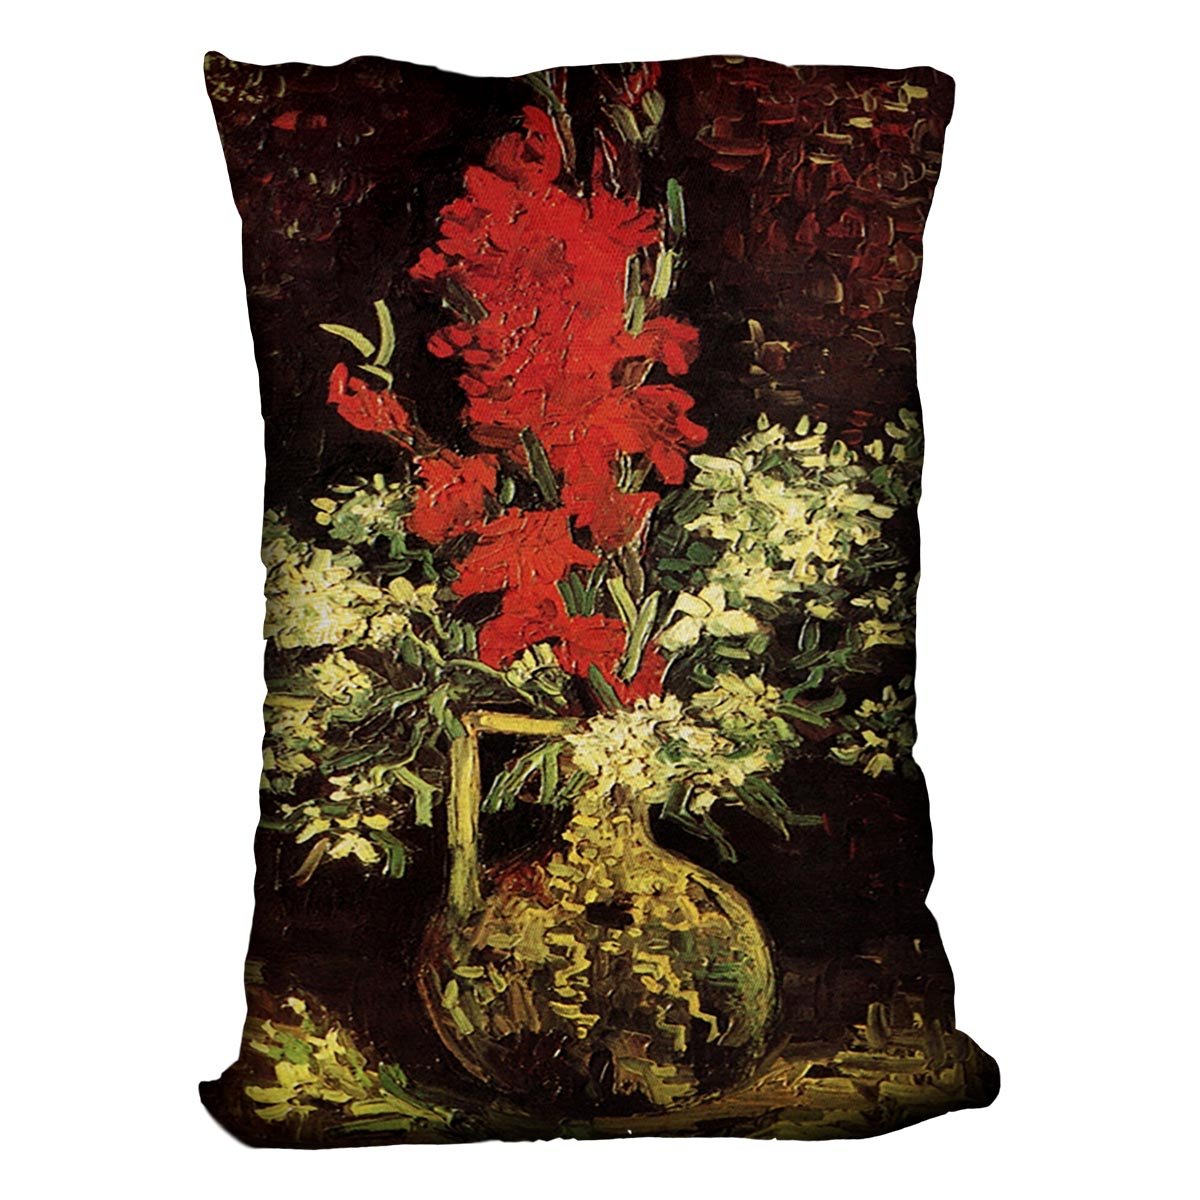 Vase with Gladioli and Carnations by Van Gogh Throw Pillow